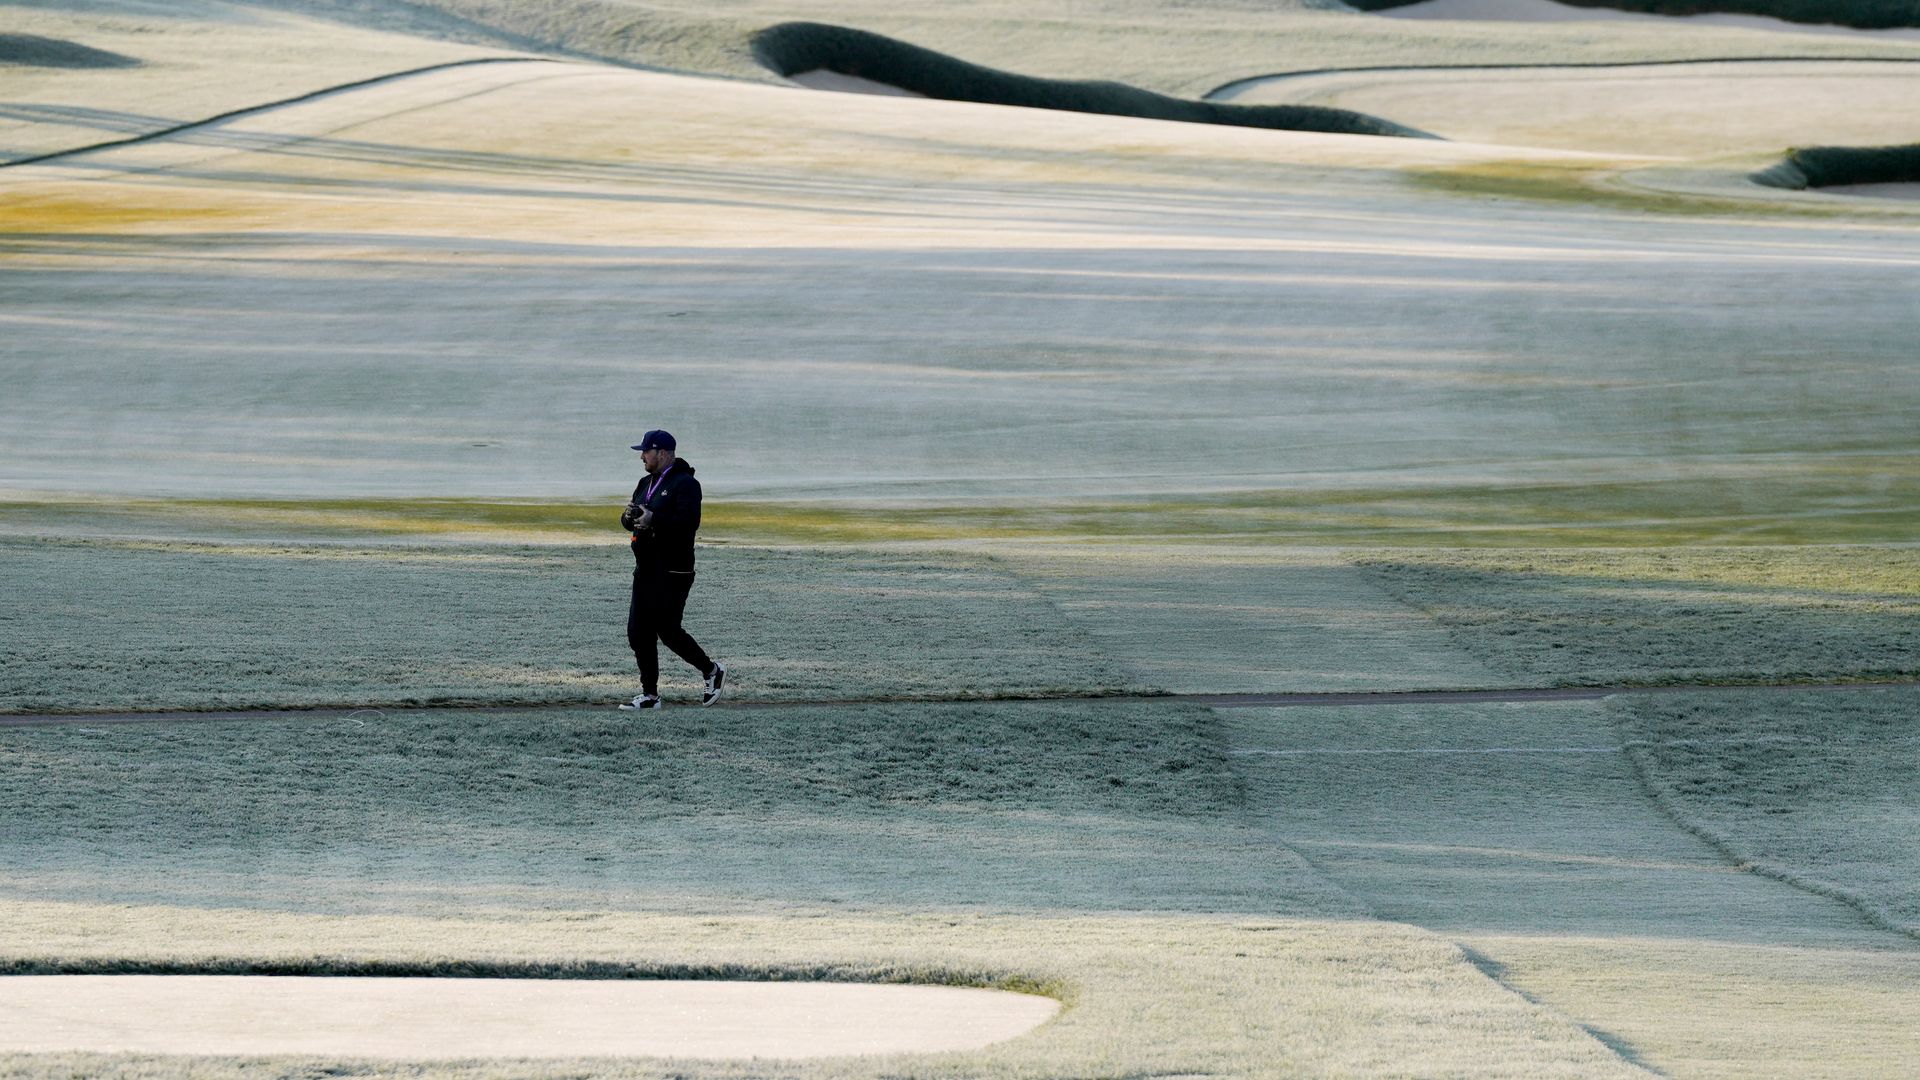 PGA Championship start delayed by frost | Will weather remain a factor?